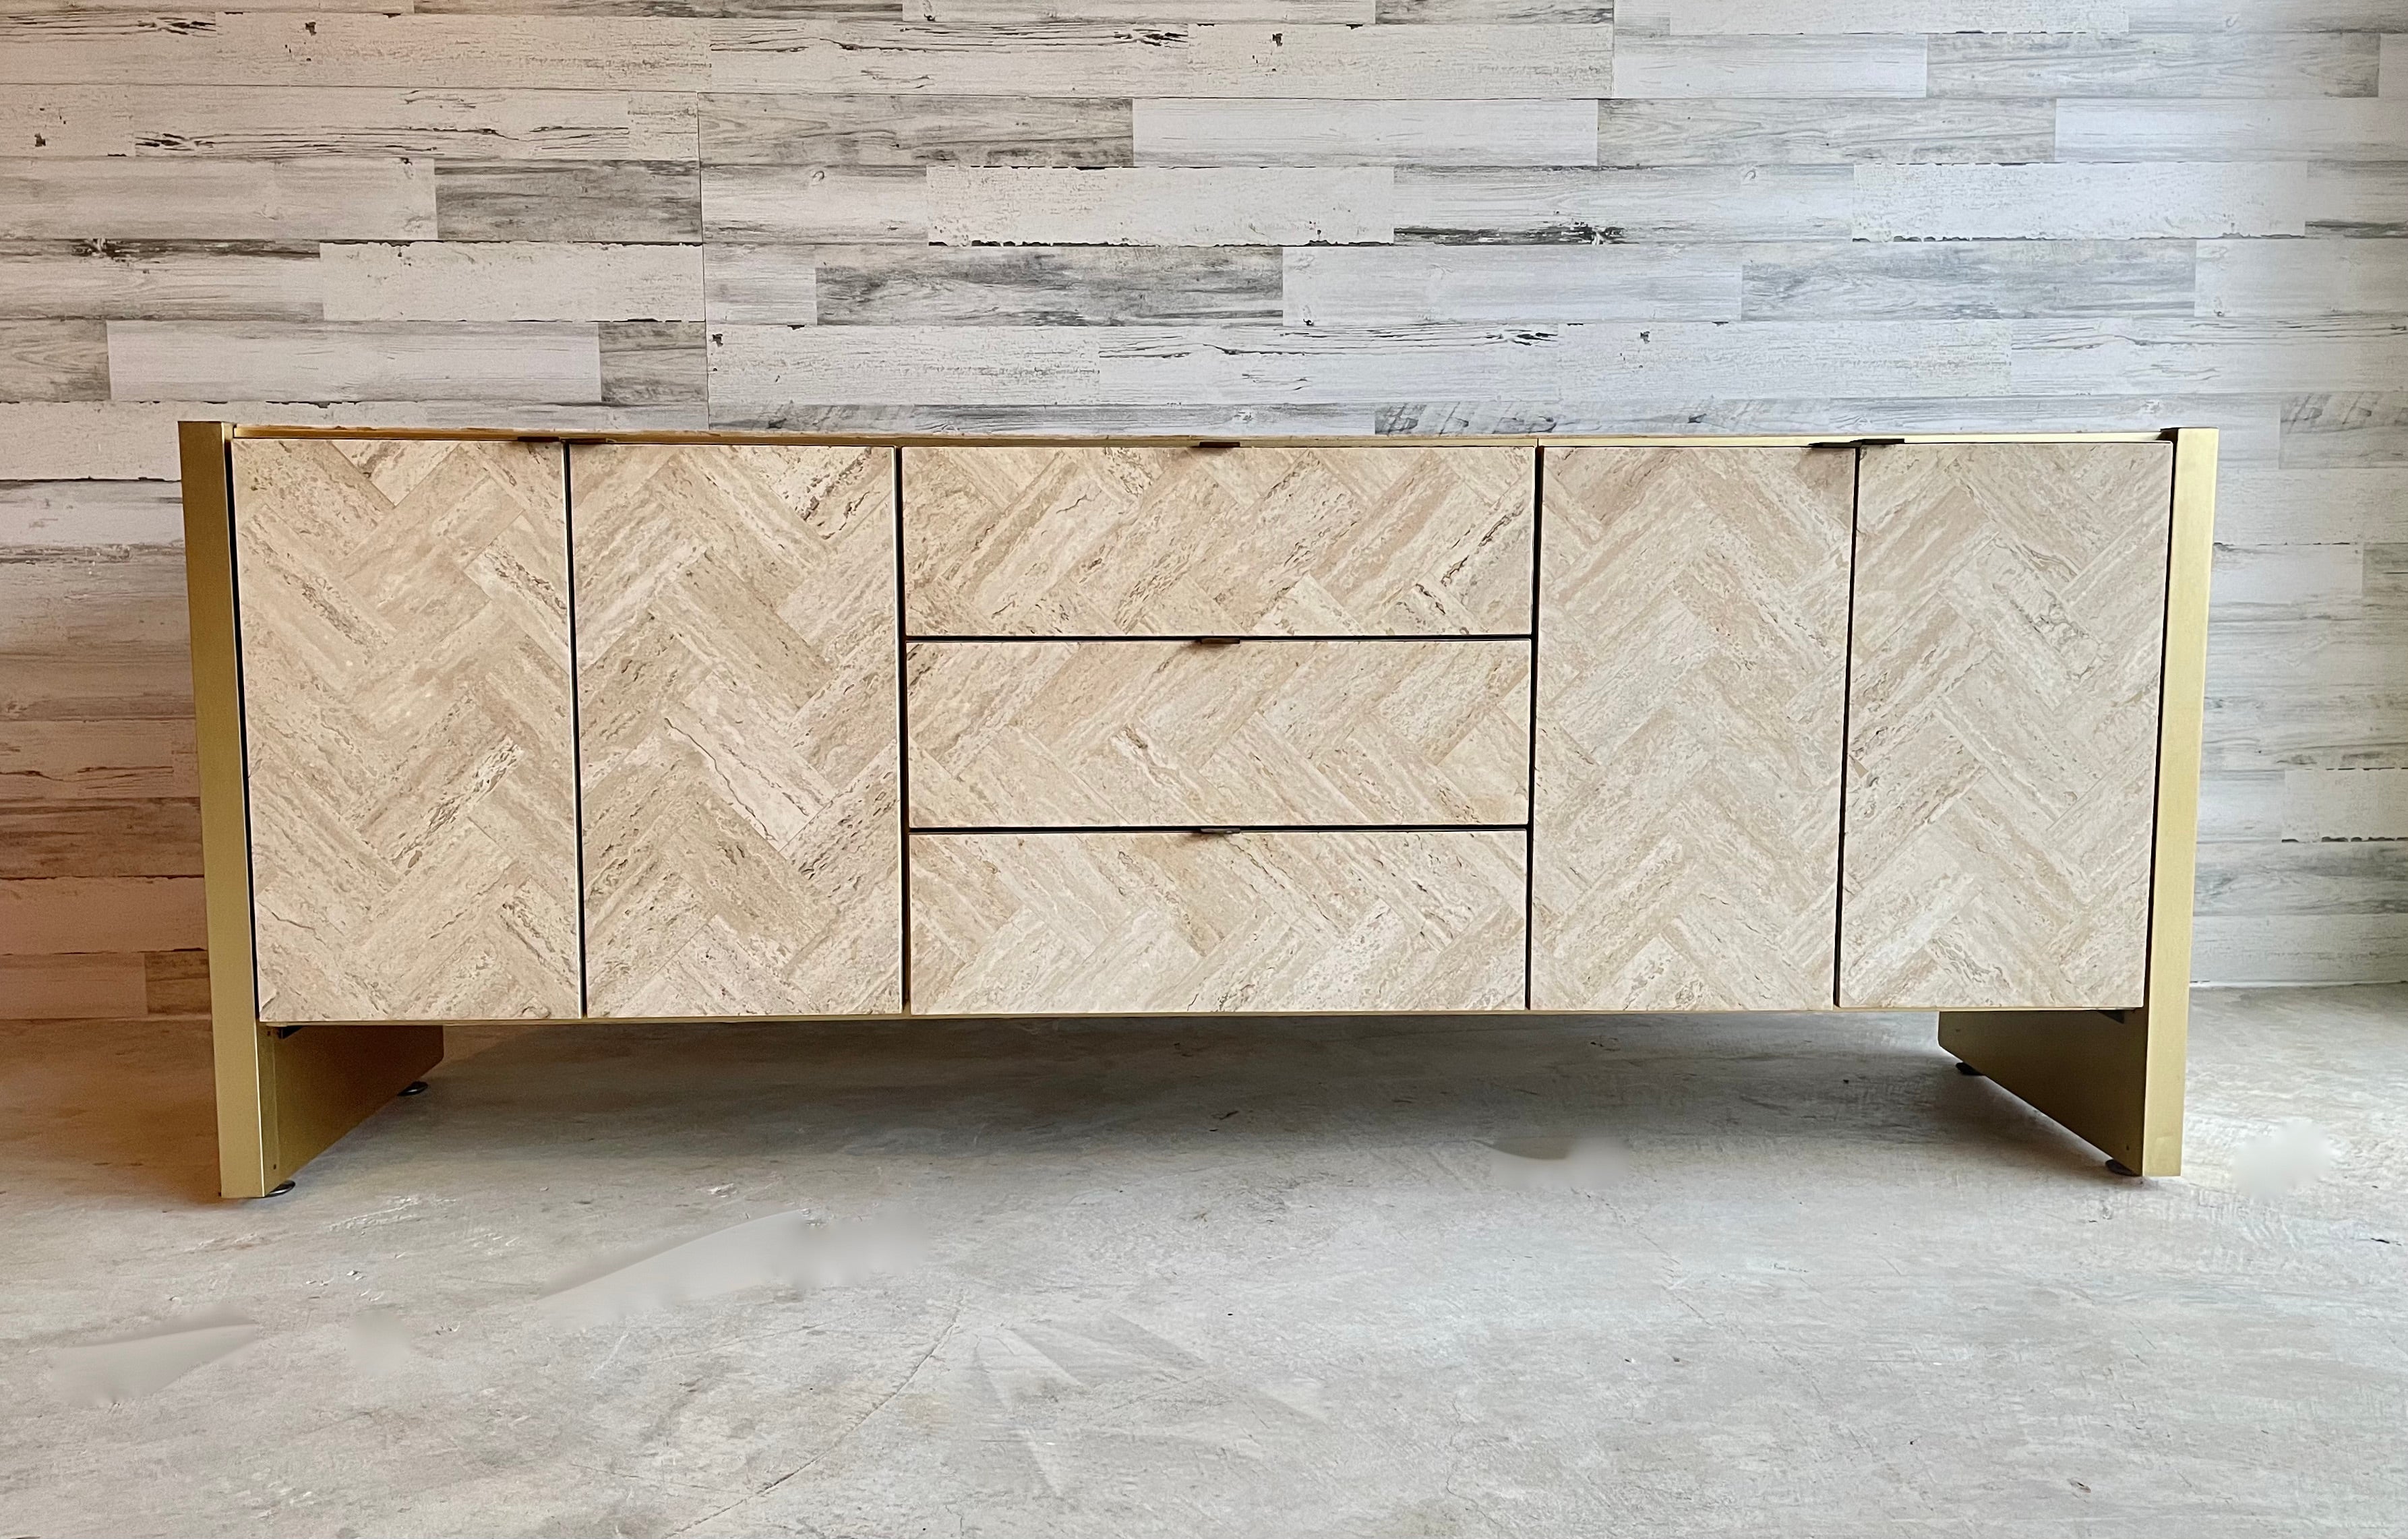 Ello Herringbone travertine and brushed brass credenza / sideboard. Adjustable legs for leveling. Drawers and doors for all kinds of storage. Very good condition for its age. These are very rare to find!